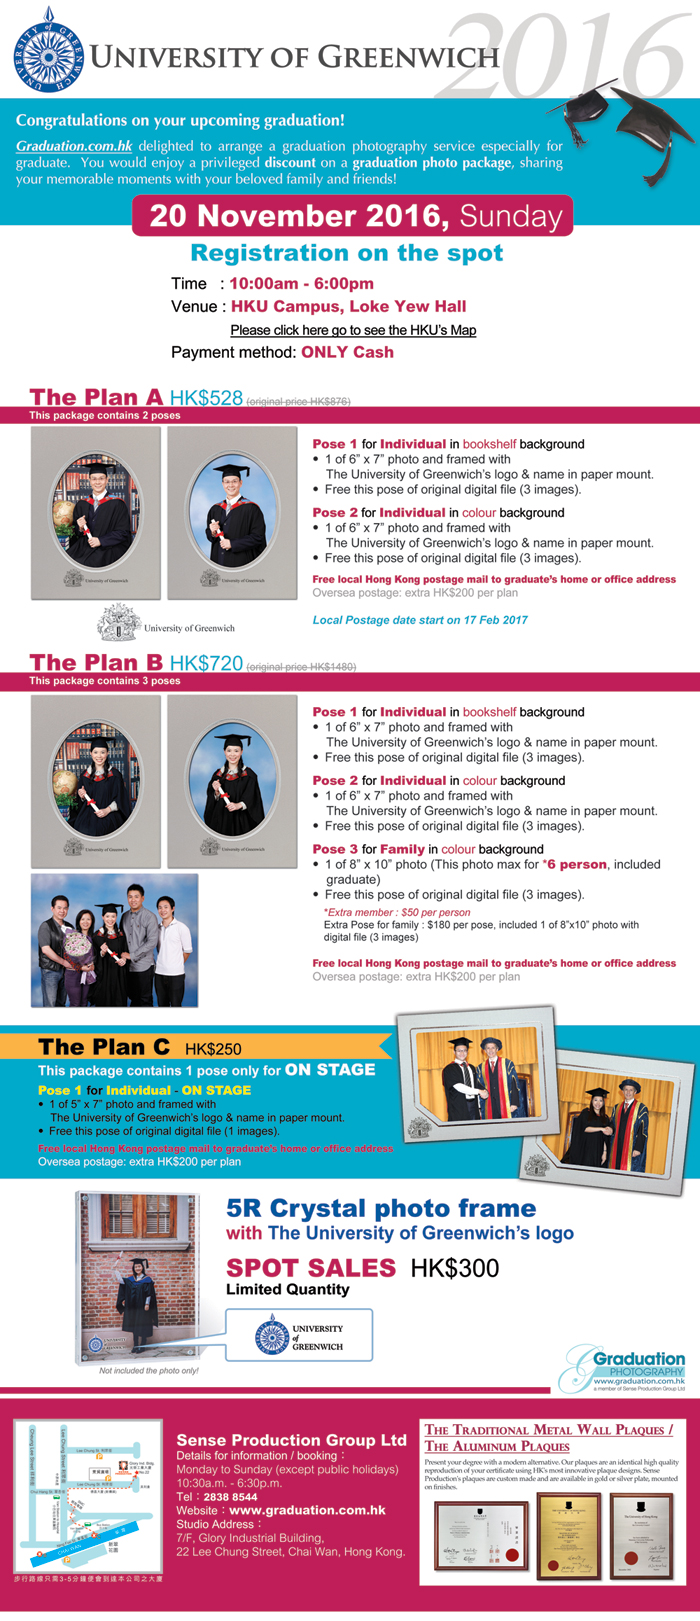 University of Greenwich Ceremony on 30 April 2015 in HKU Campus